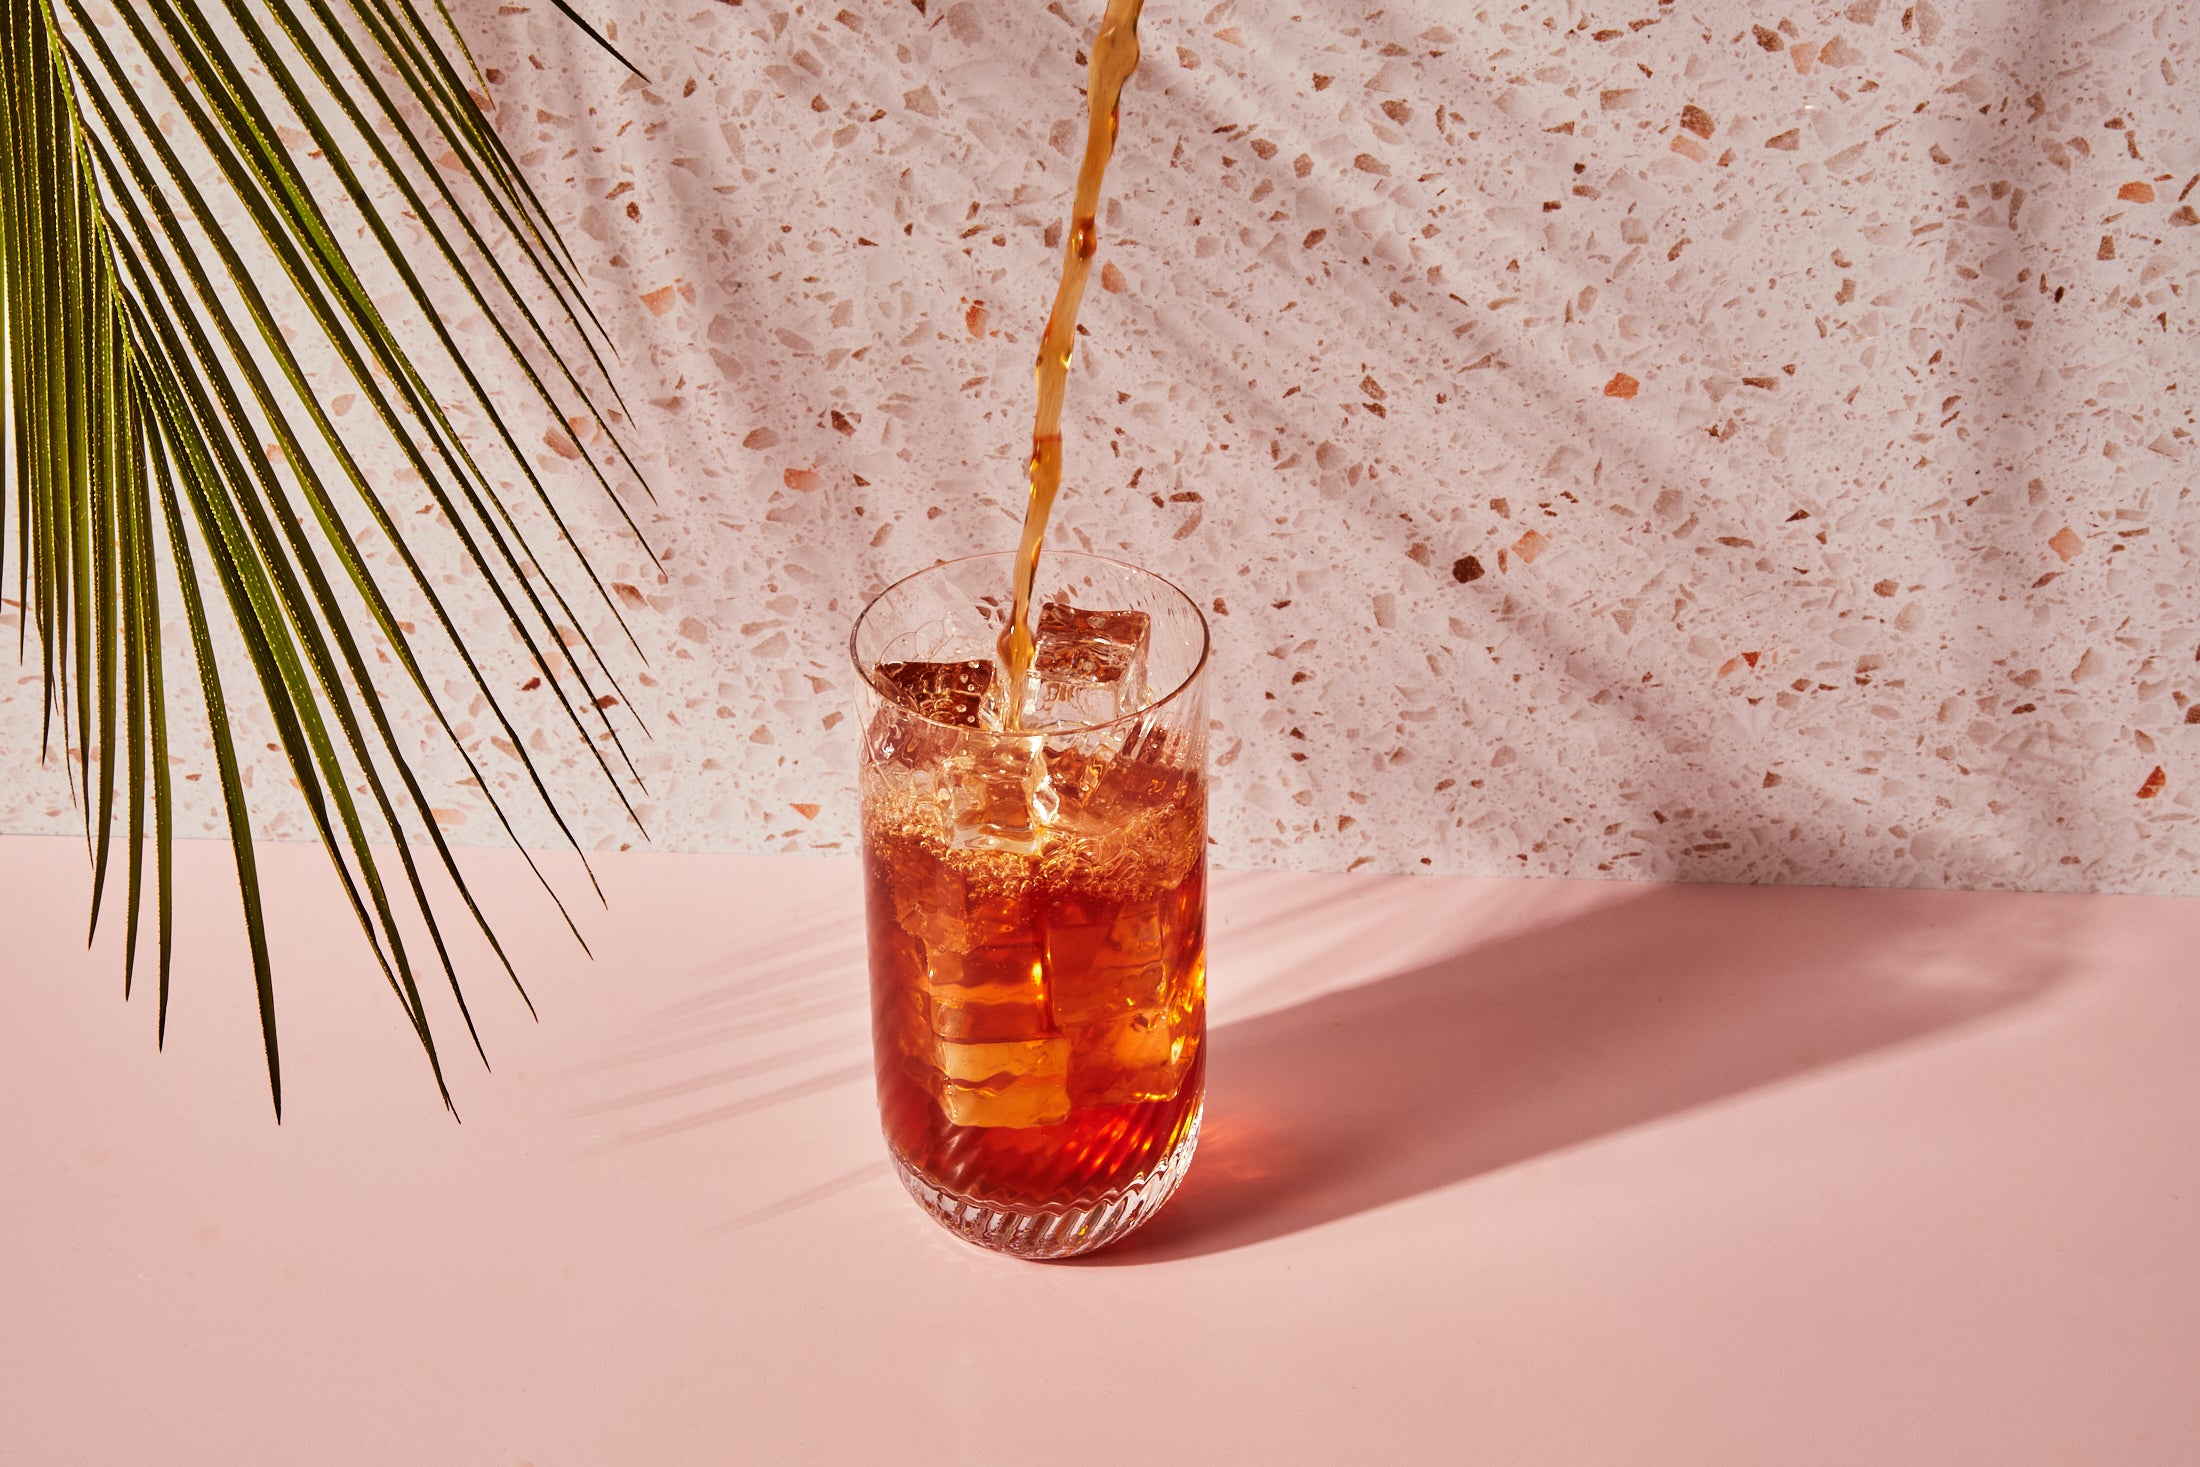 Stream of iced tea being poured into a glass filled with ice with a orange terazzo background.